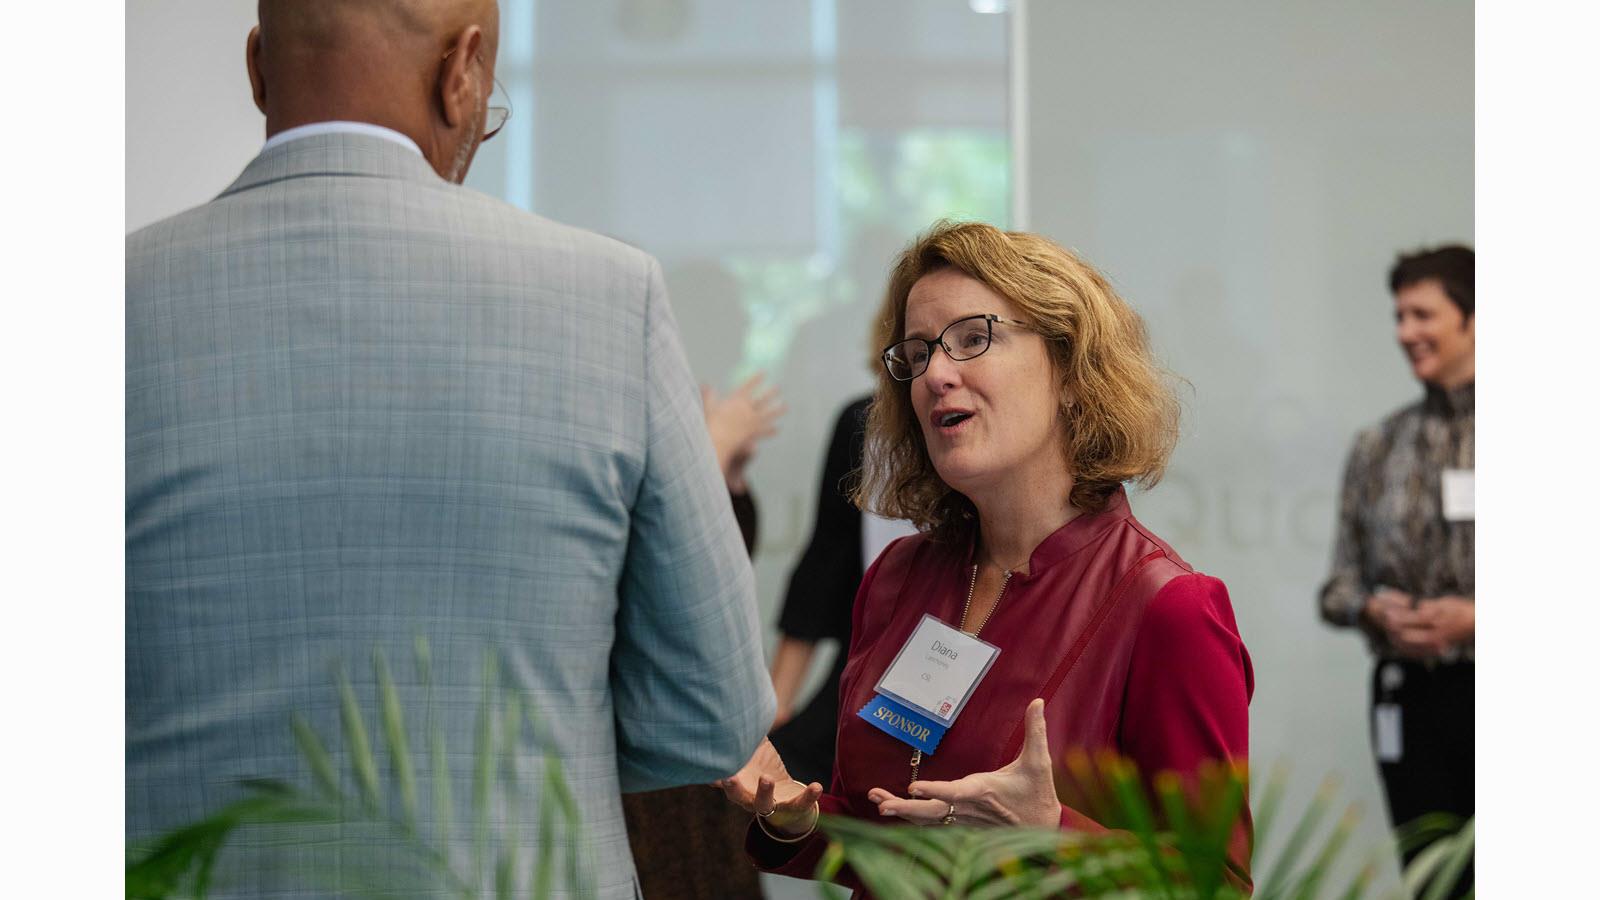 CSL's Diana Lanchoney talks with an attendee at the Nucleus Awards in Philadelphia